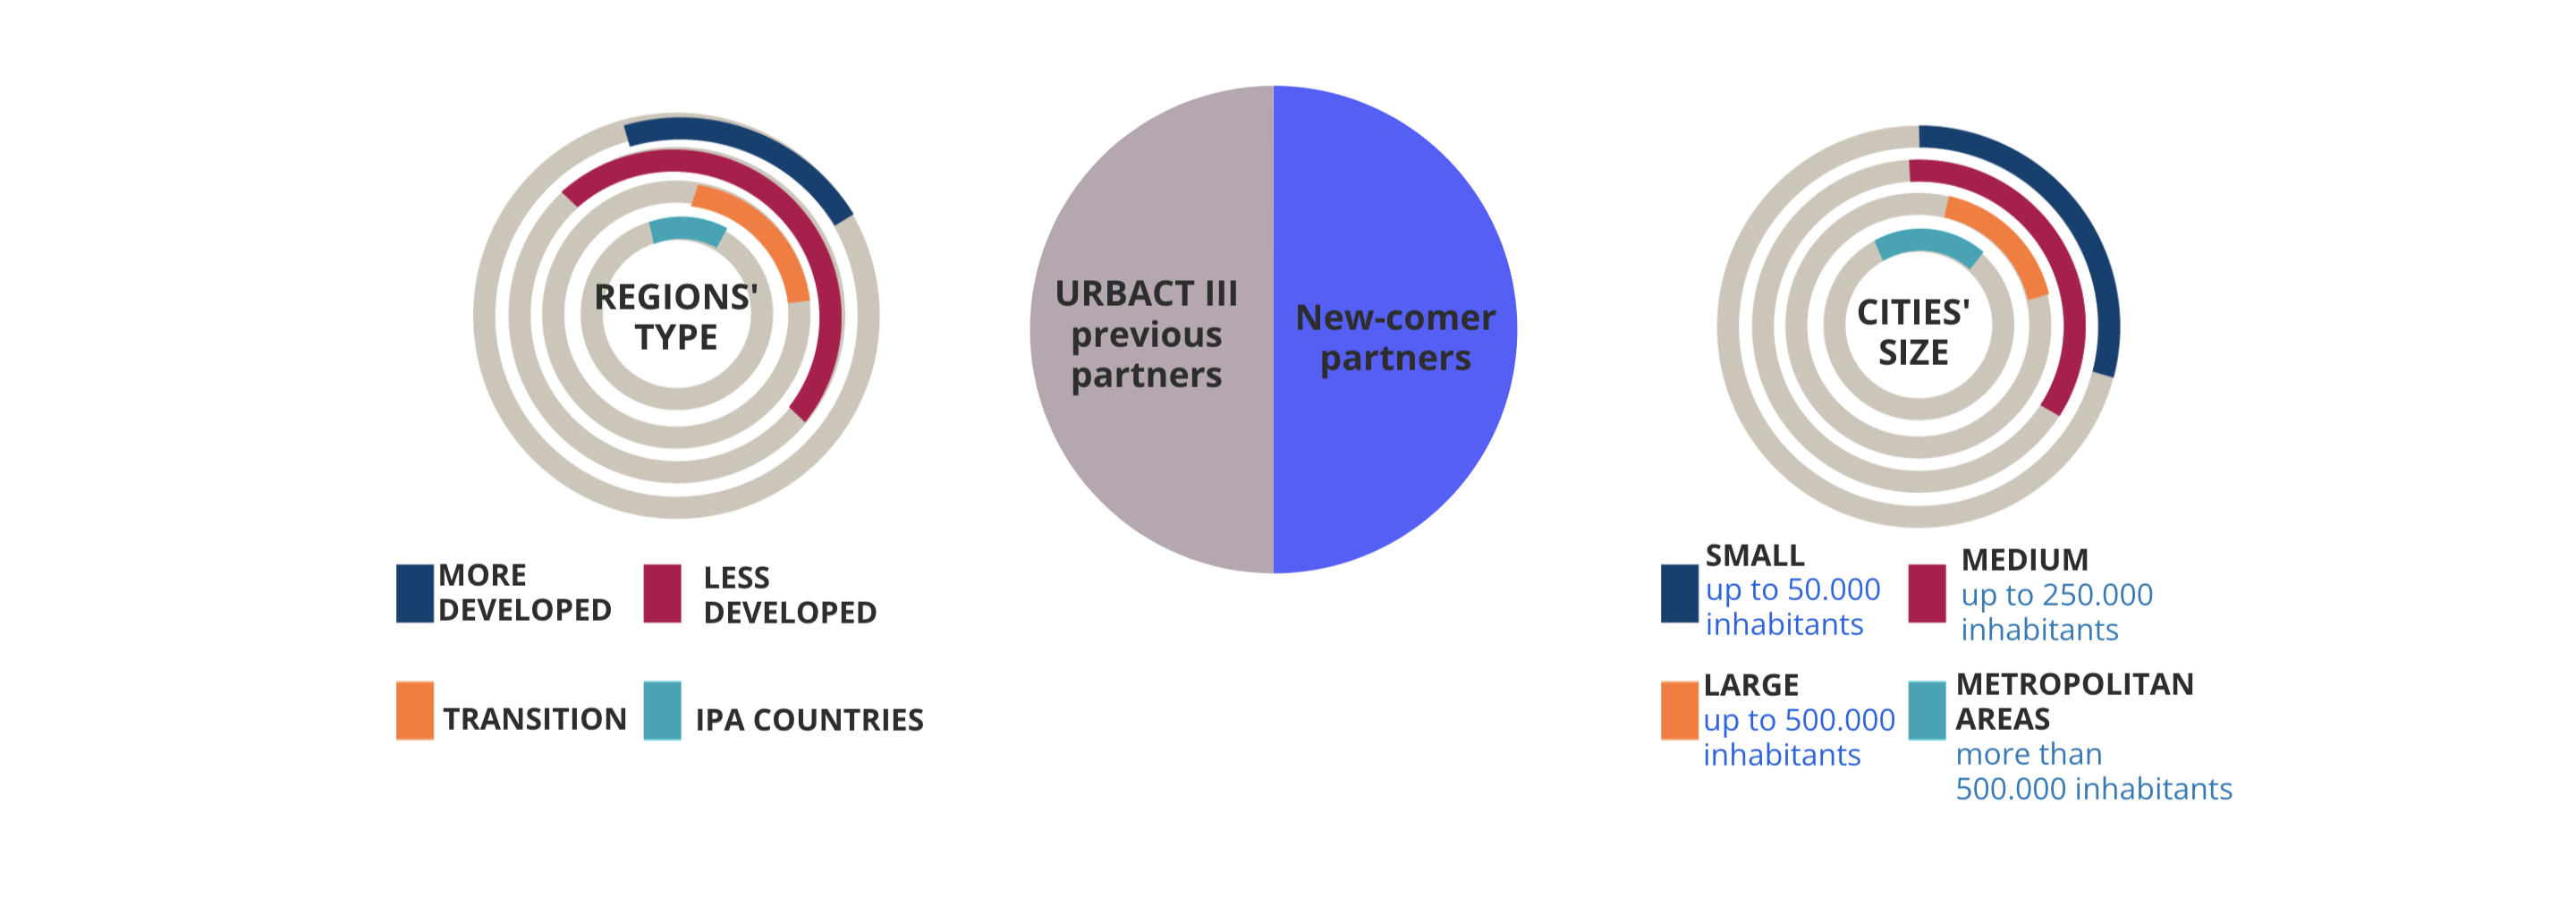 Networks approved by the URBACT IV Monitoring Committee.